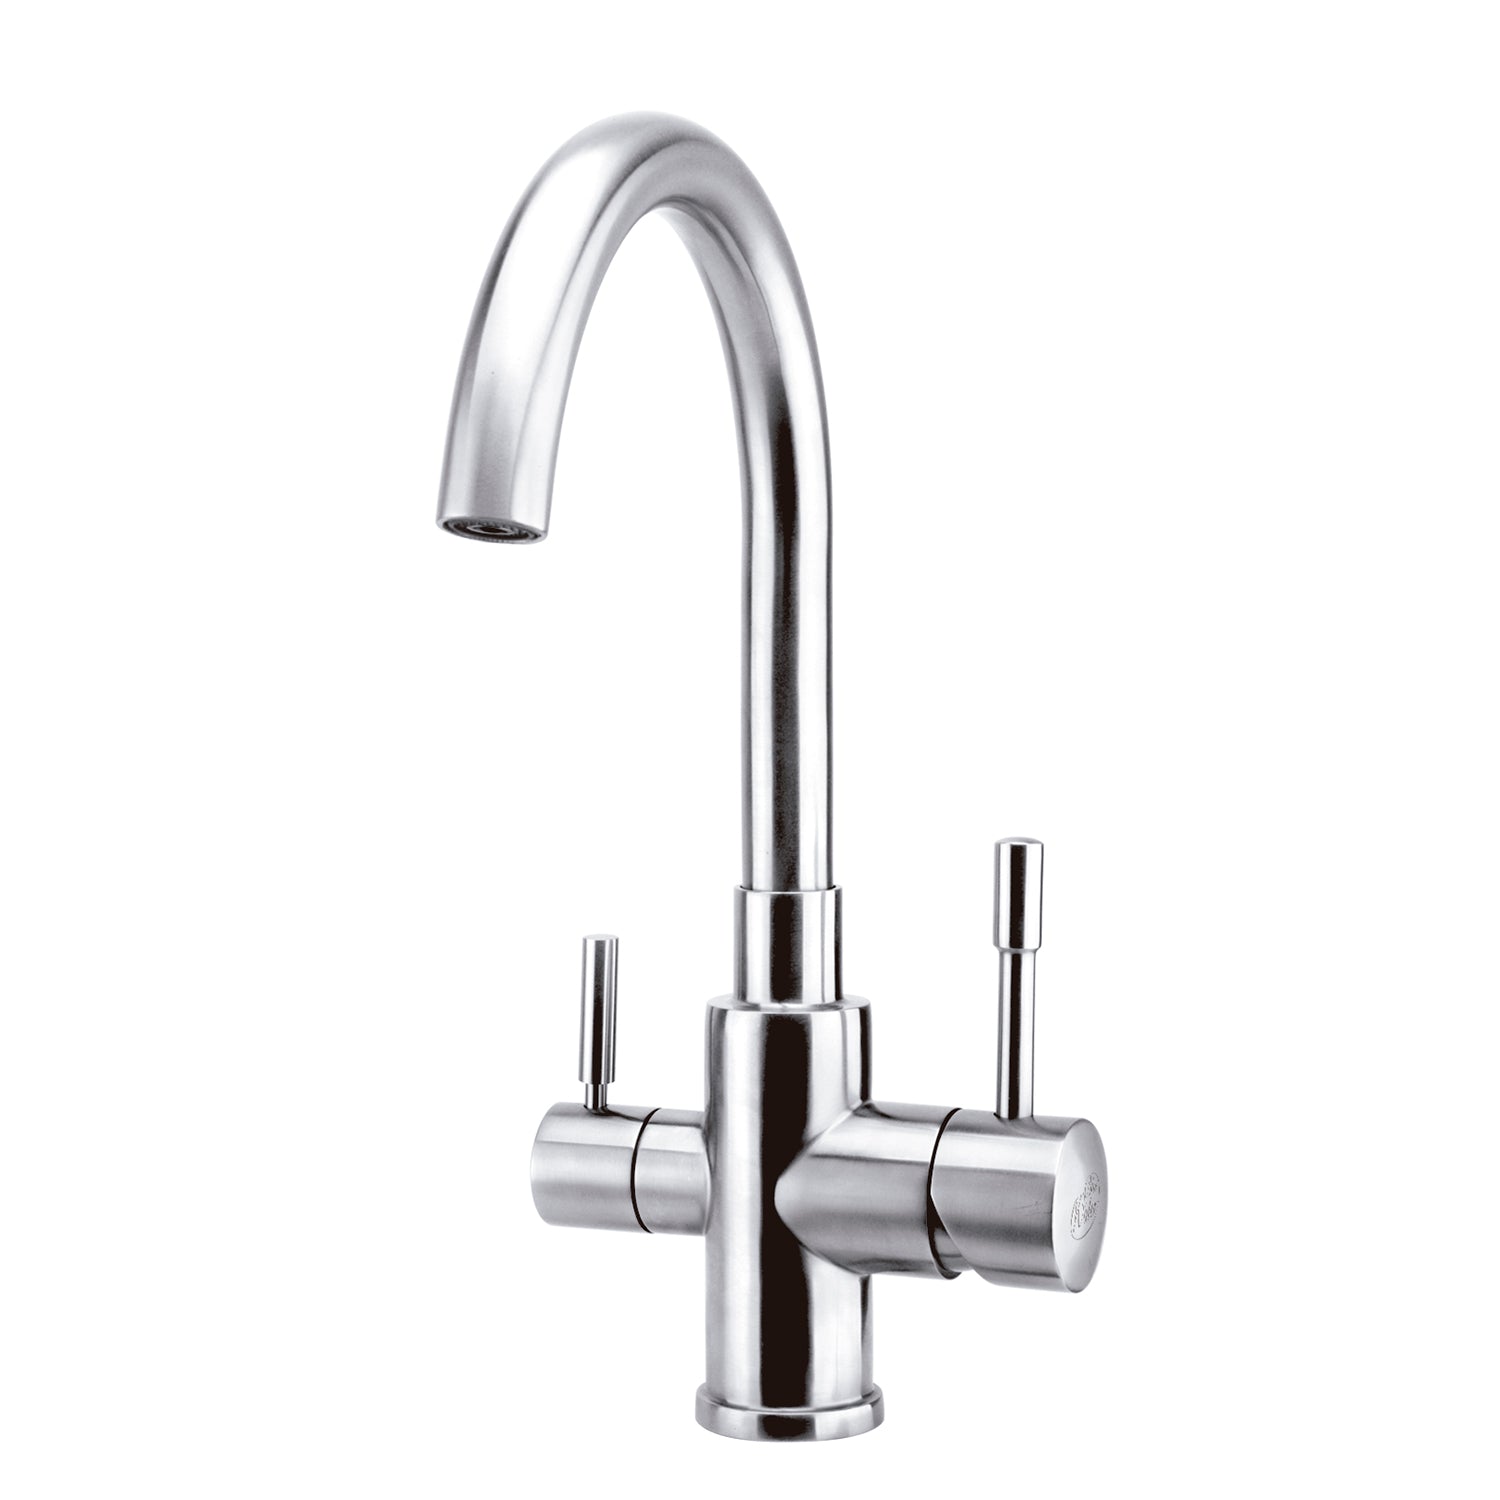 DAX Double Handle Kitchen Filter Faucet - Brushed Nickel (DAX-16005-BN)